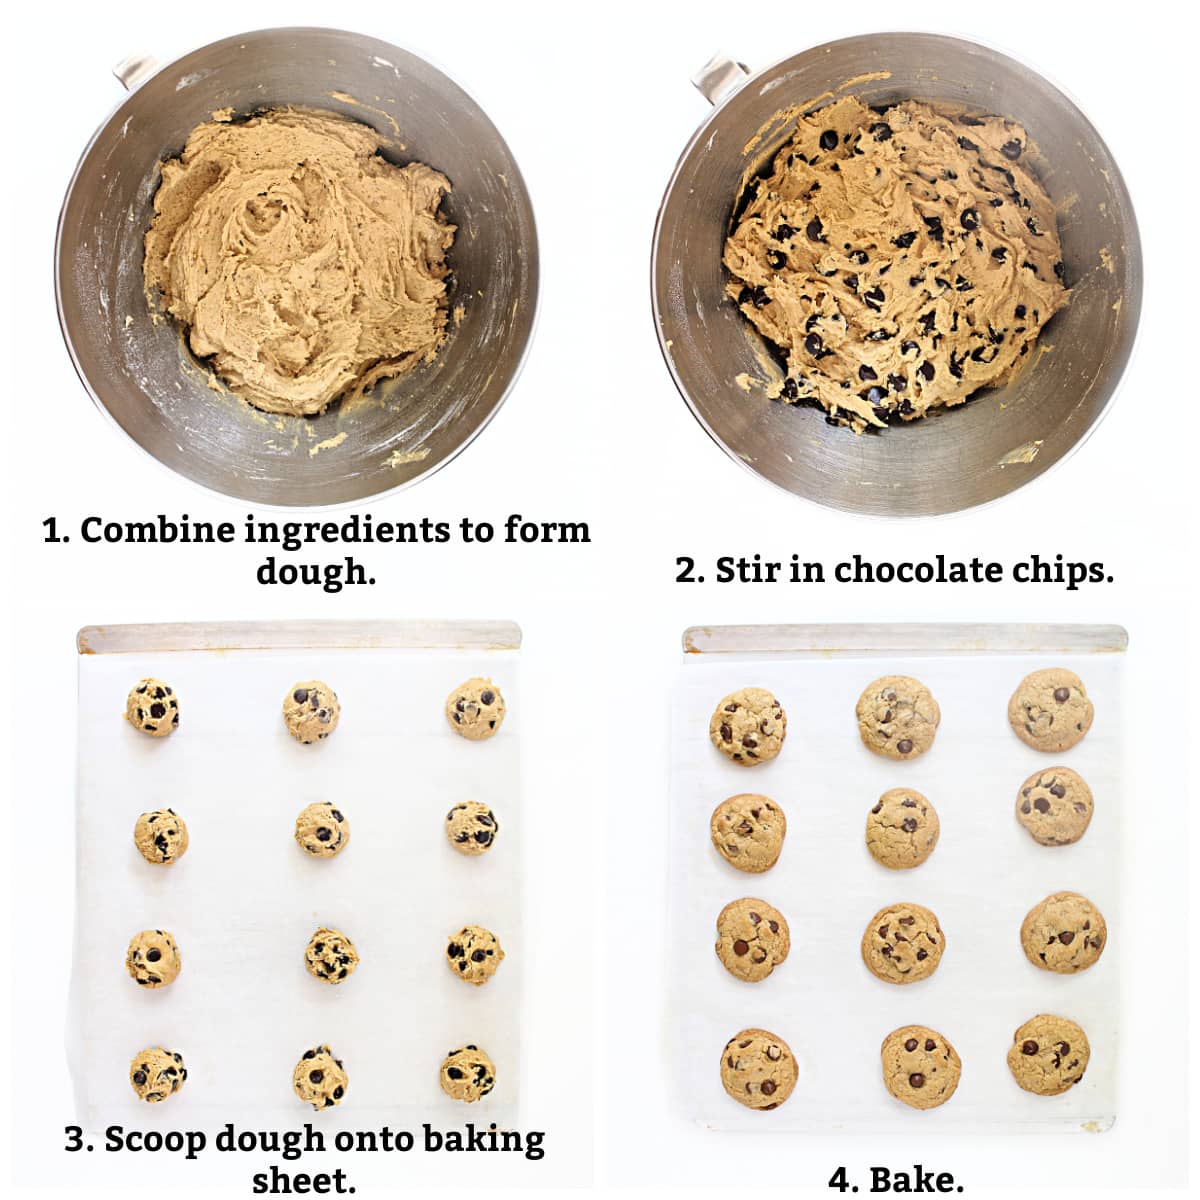 Instructions: combine ingredients for dough, add chocolate chips, scoop onto baking sheet, bake.